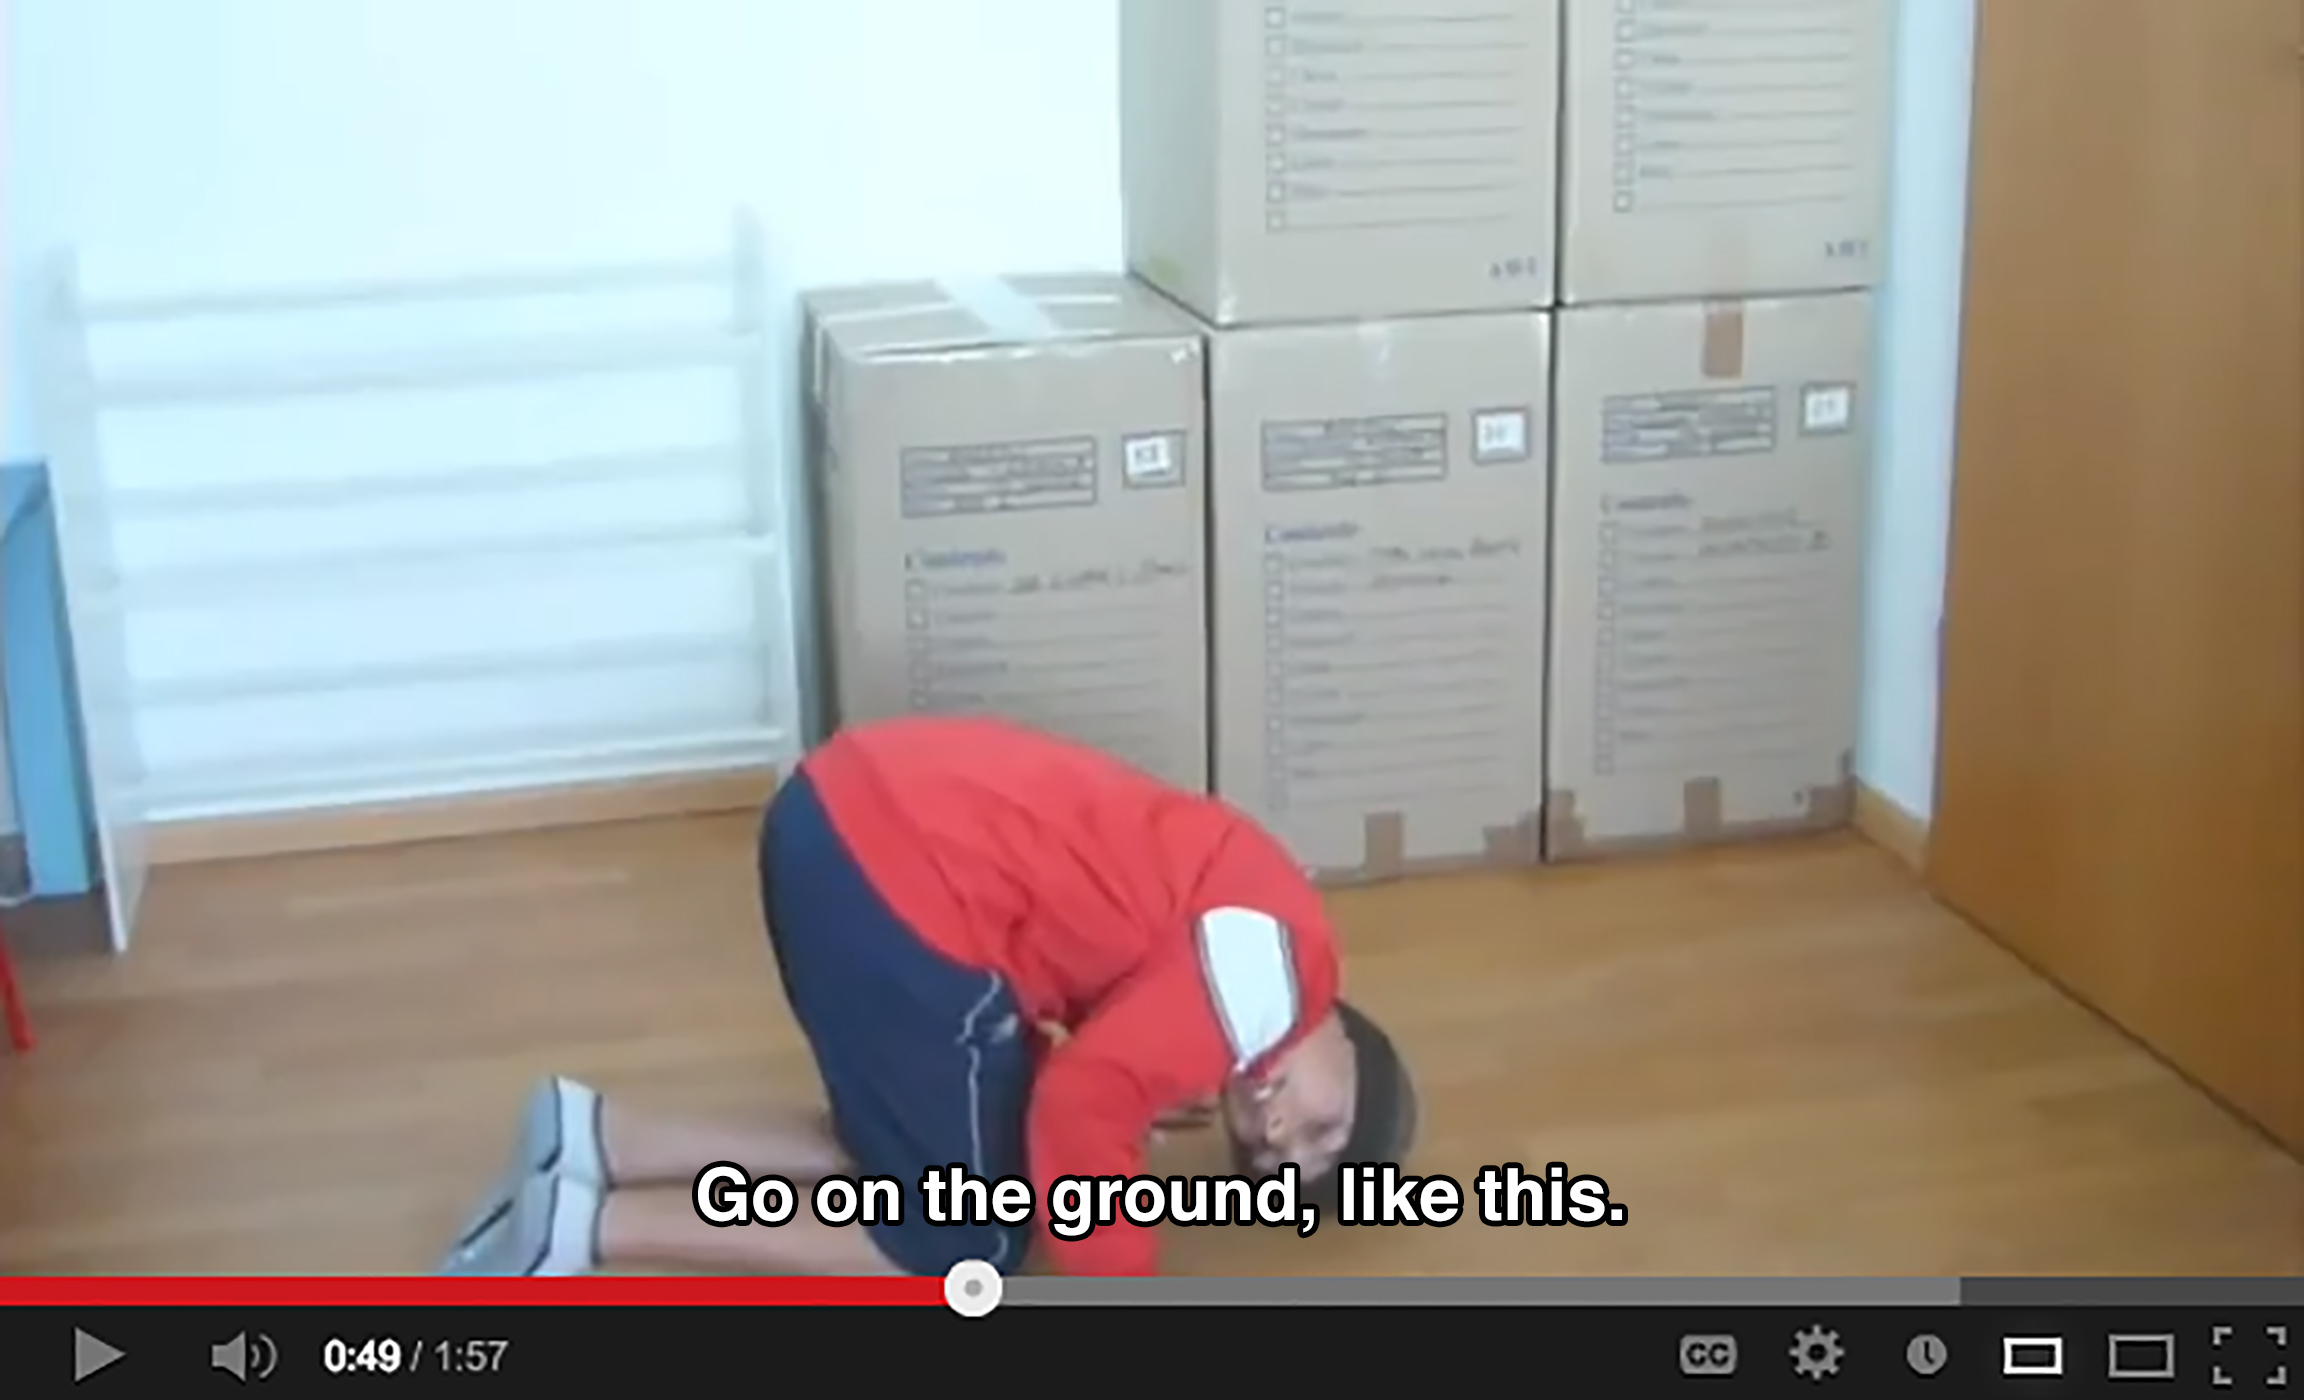 A boy has his knees, hands, and head on the floor in a room with an empty shoe rack and stacked cardboard boxes. He says: Go on the ground, like this.